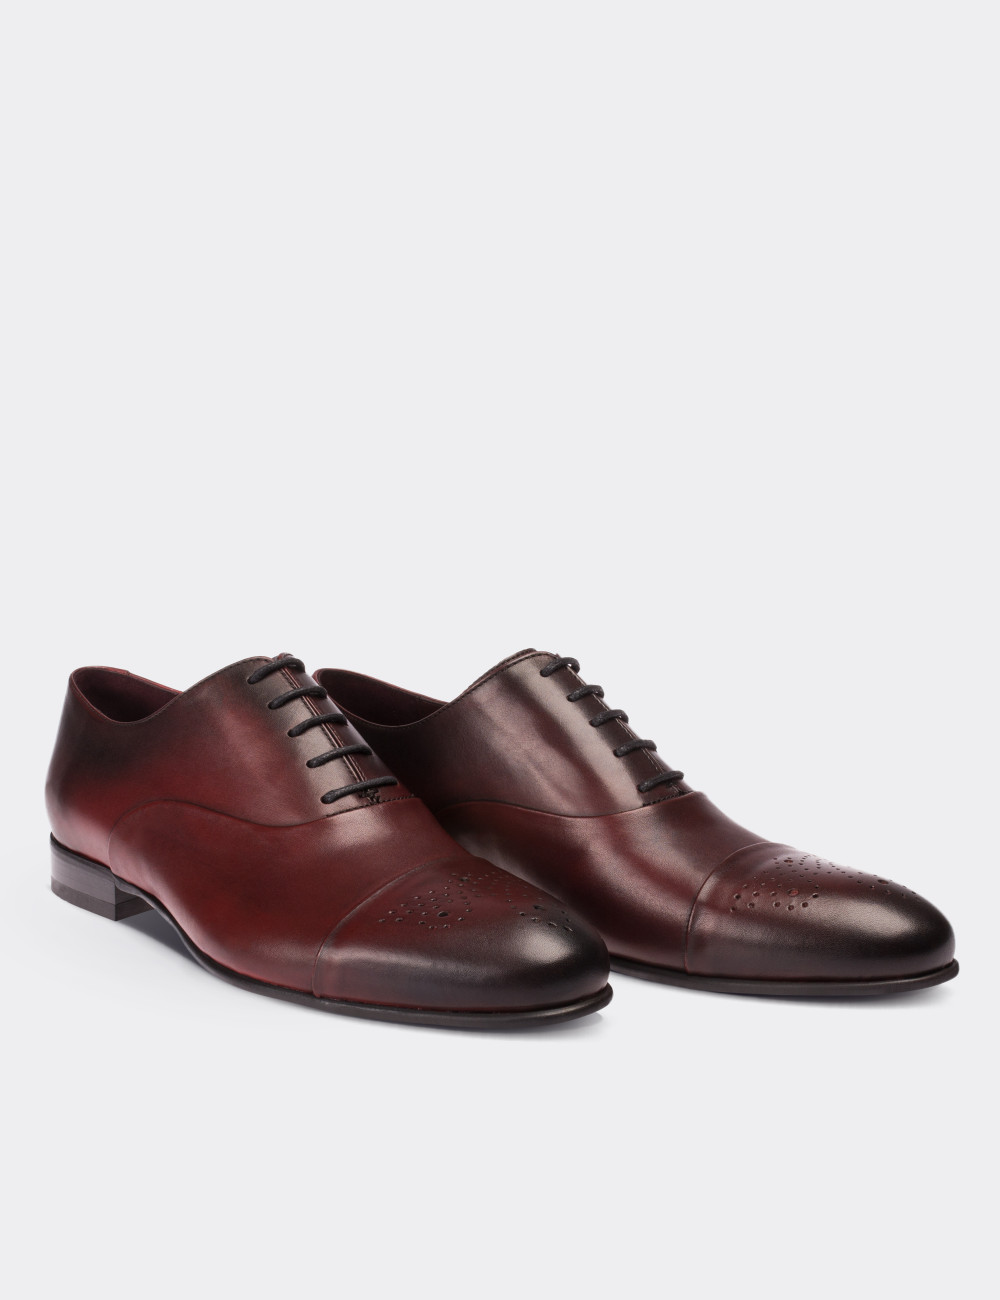 Burgundy  Leather Classic Shoes - 01653MBRDM01